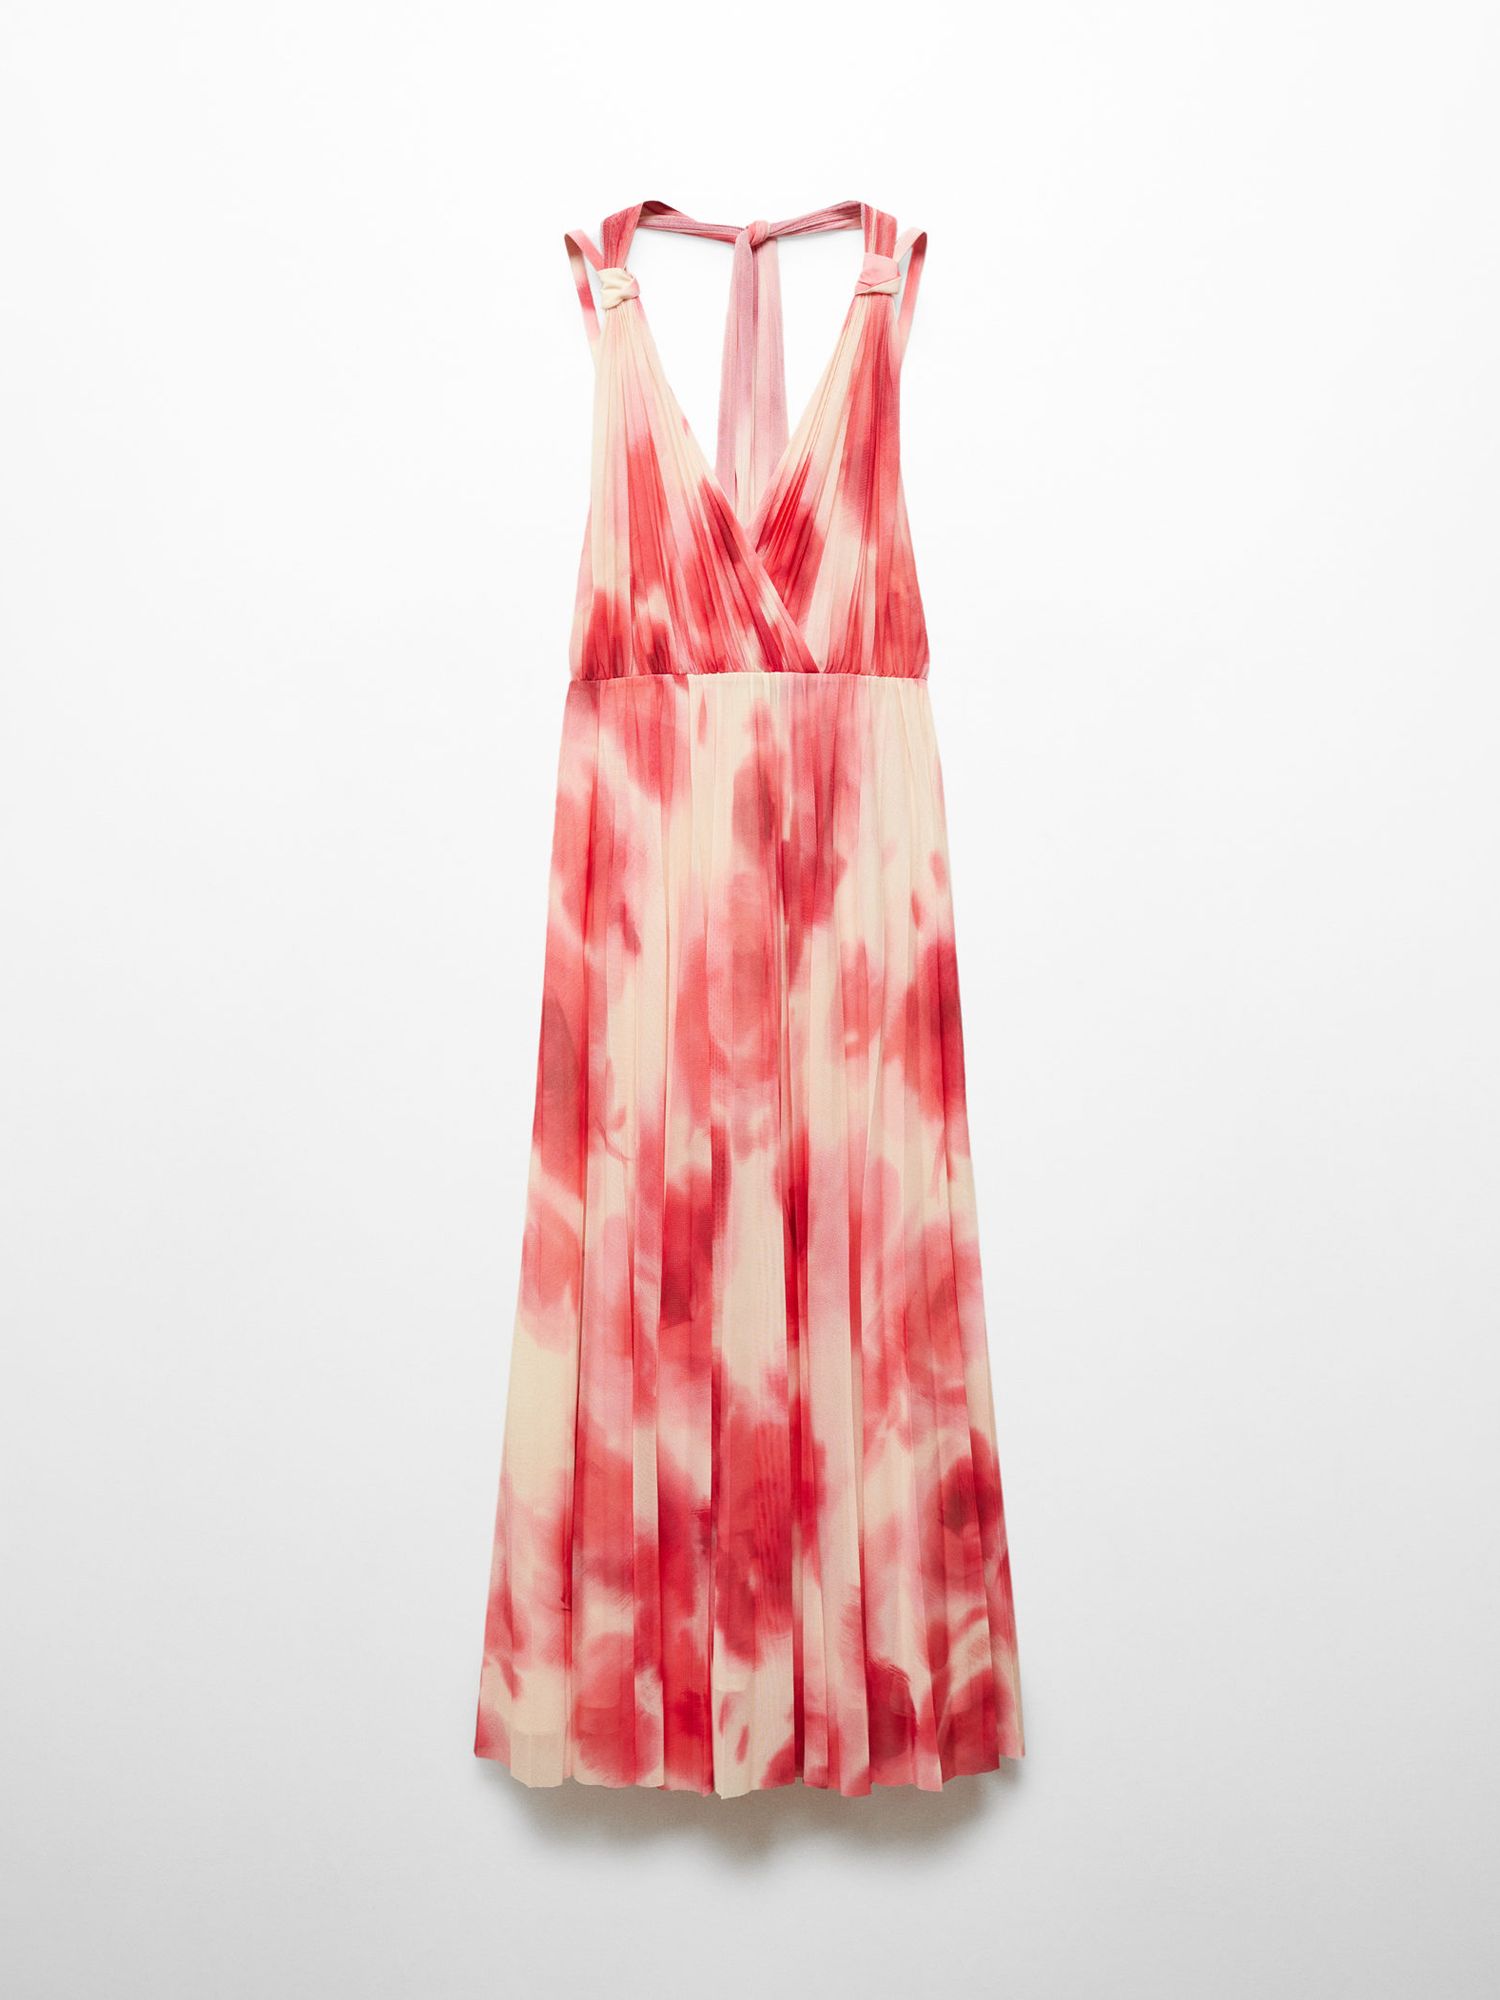 Buy Mango Olimpia Pleated Maxi Dress, Bright Red Online at johnlewis.com